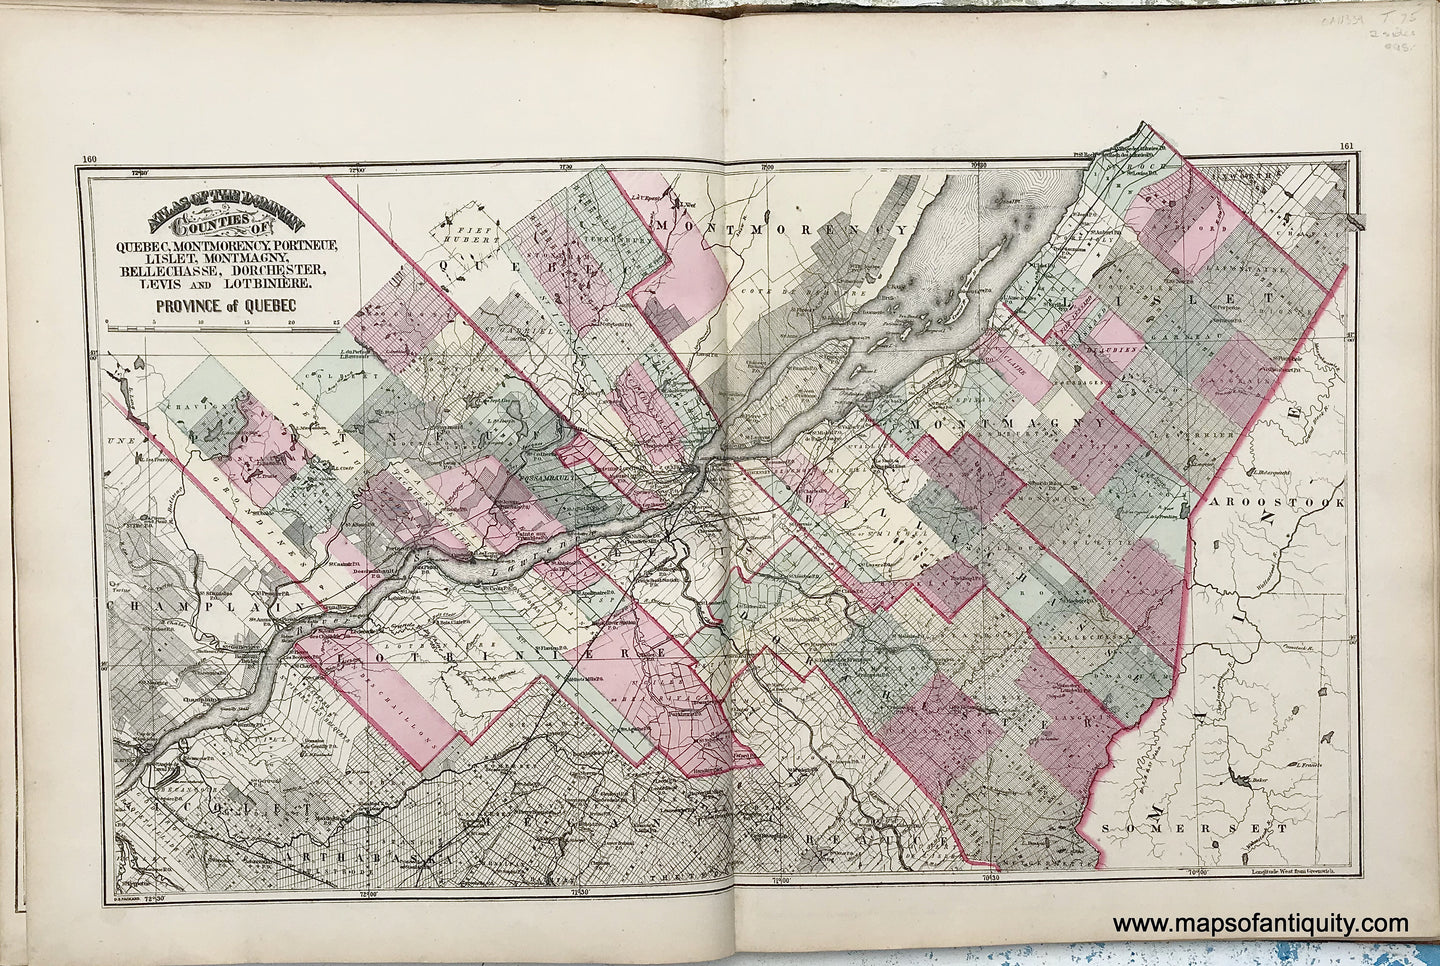 Sow albue morgenmad 1875 - Sheet with three maps: Counties of Quebec, Montmorency, Portneu –  Maps of Antiquity